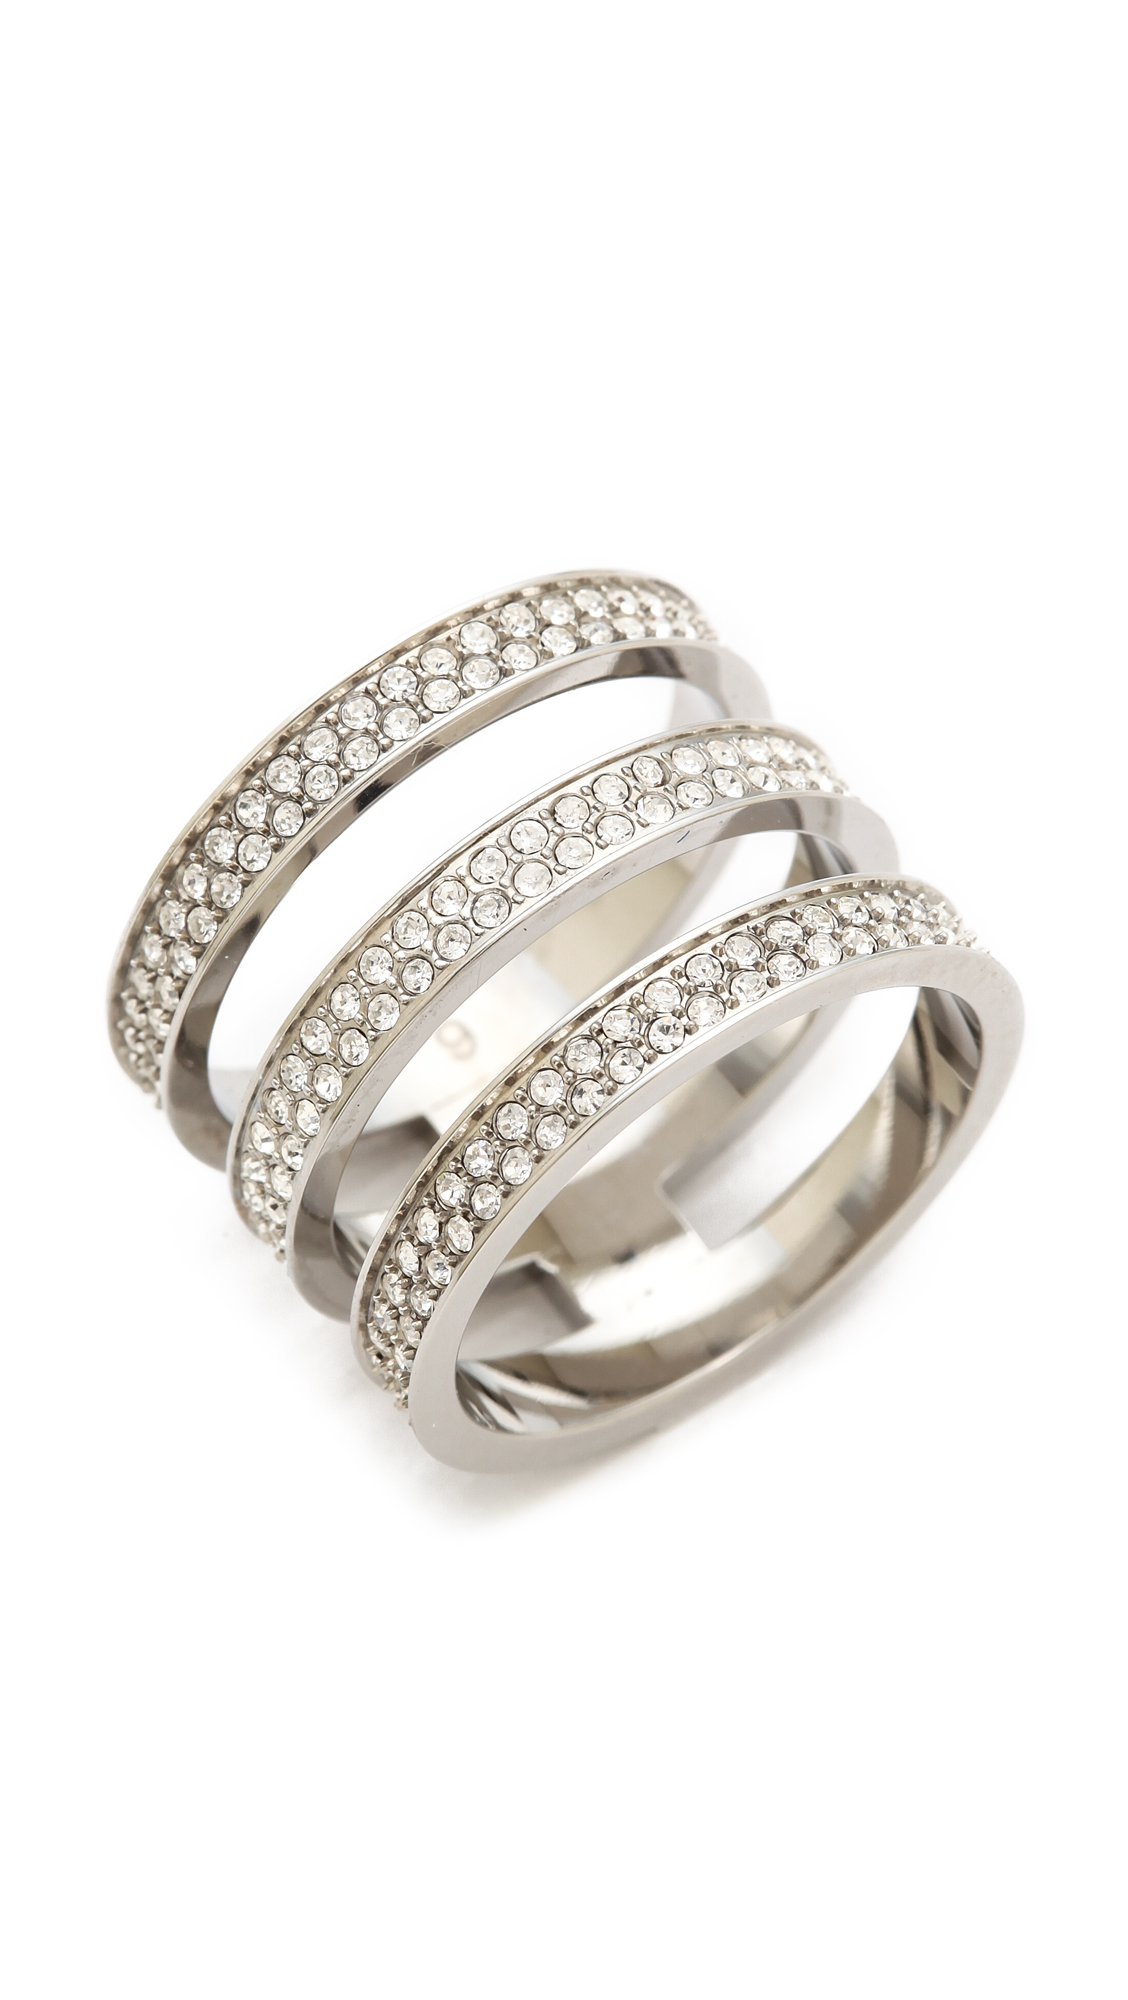 Lyst - Michael Kors Tri Stack Open Pave Bar Ring Silverclear in Metallic